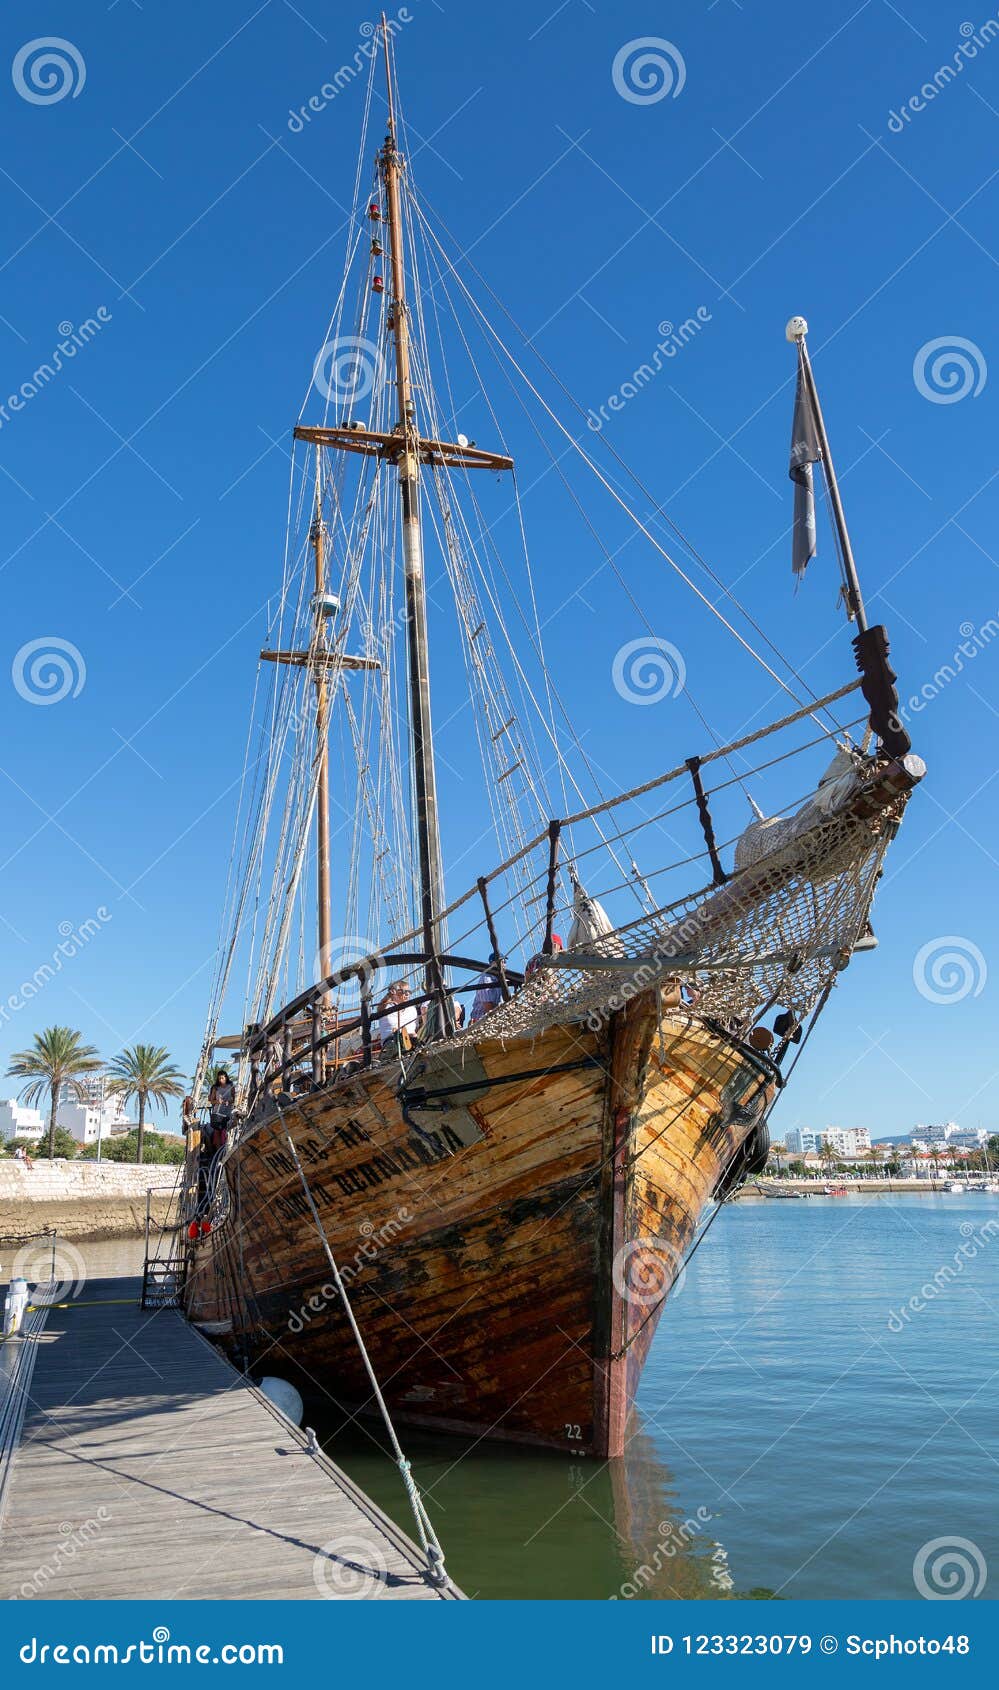 Santa Bernarda, a Popular Pirate Boat in Portimao Taking Around the Coast To See the Caves. Editorial Stock Image - Image of sail, pirate: 123323079